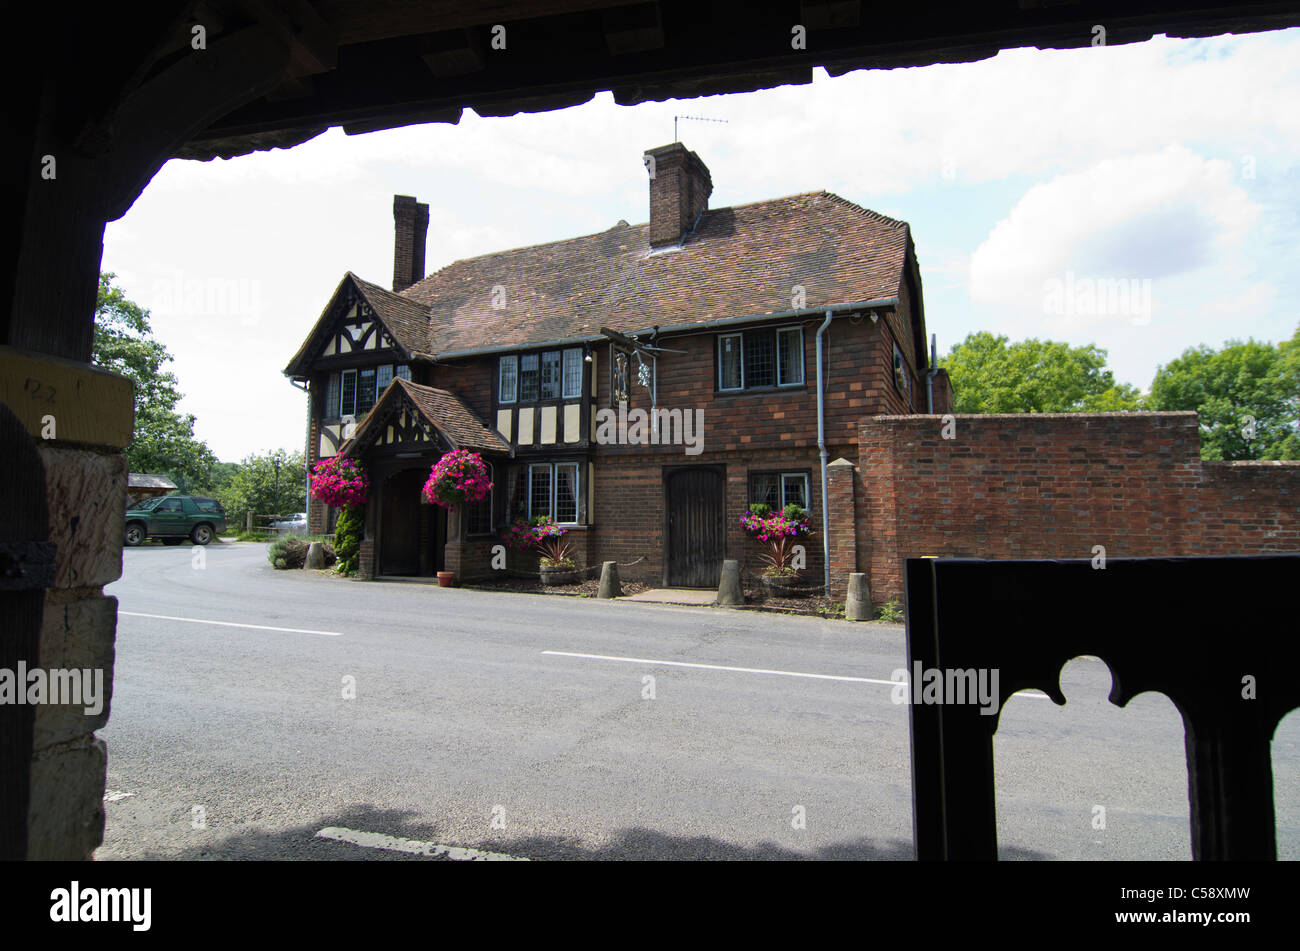 The King Henry 8th V111 Inn, a typical English country pub in Hever, Kent England. Stock Photo